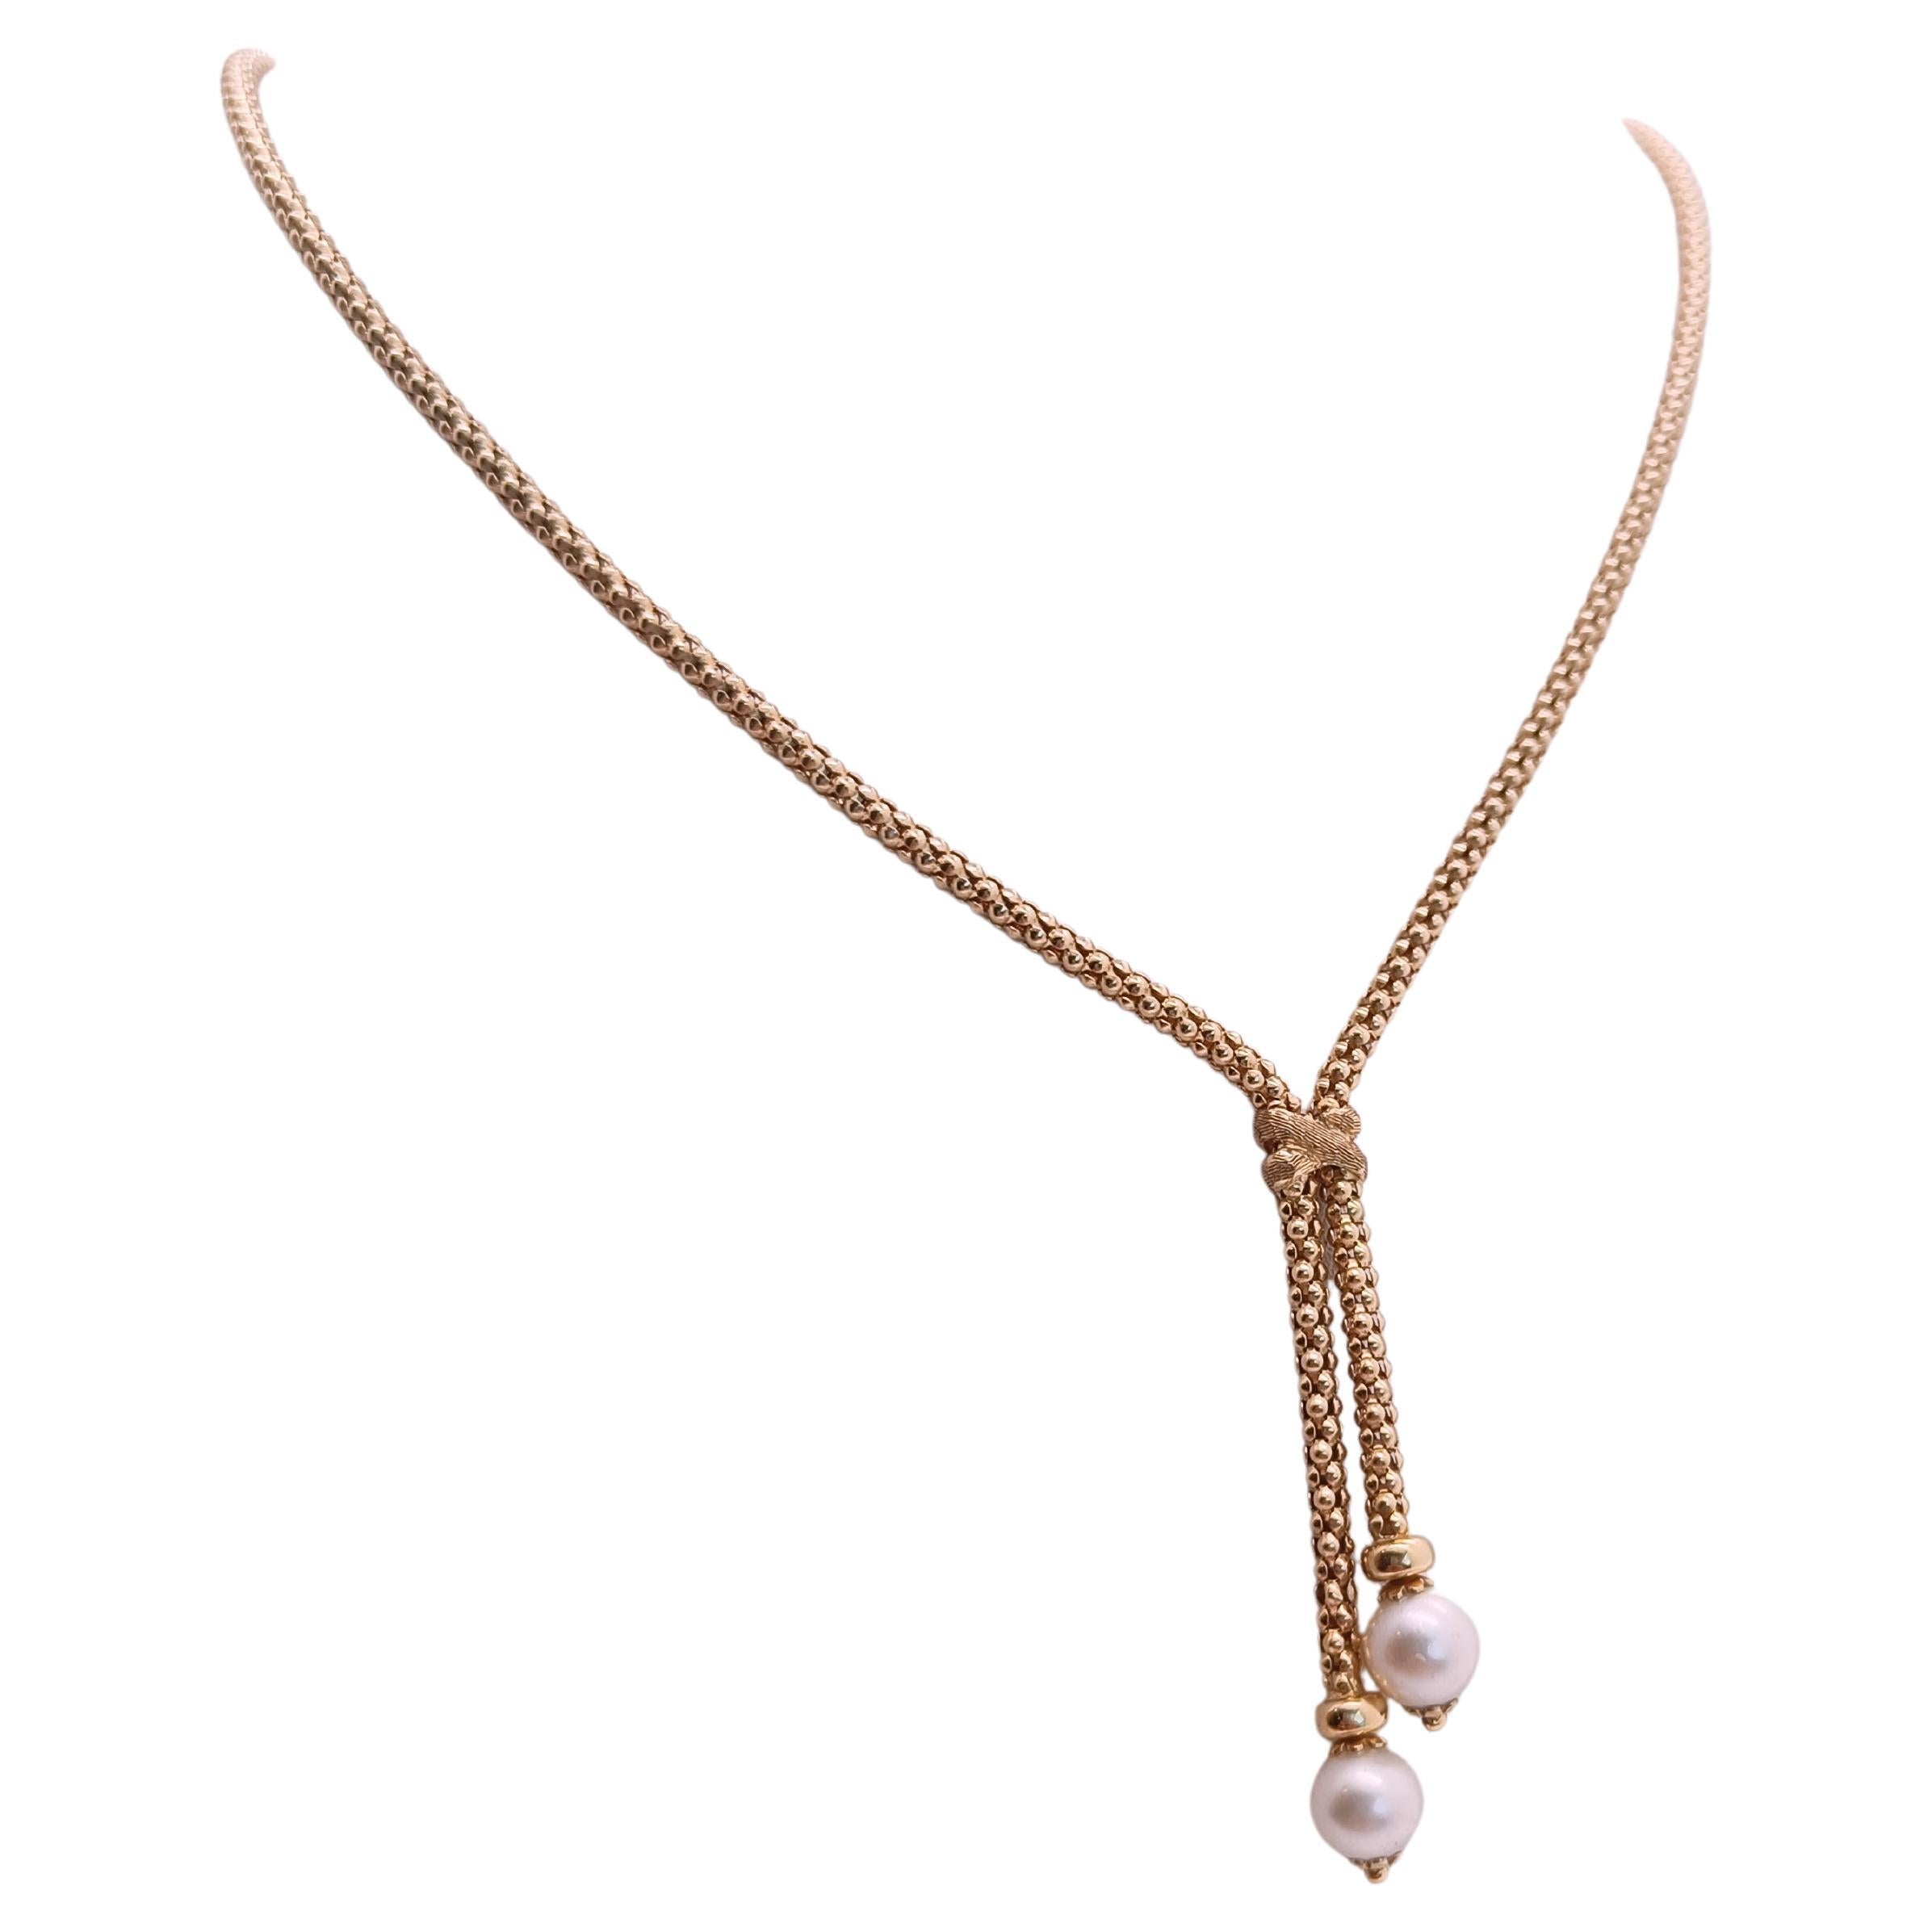 Necklace with Dangling Pearls in 18k Yellow Gold